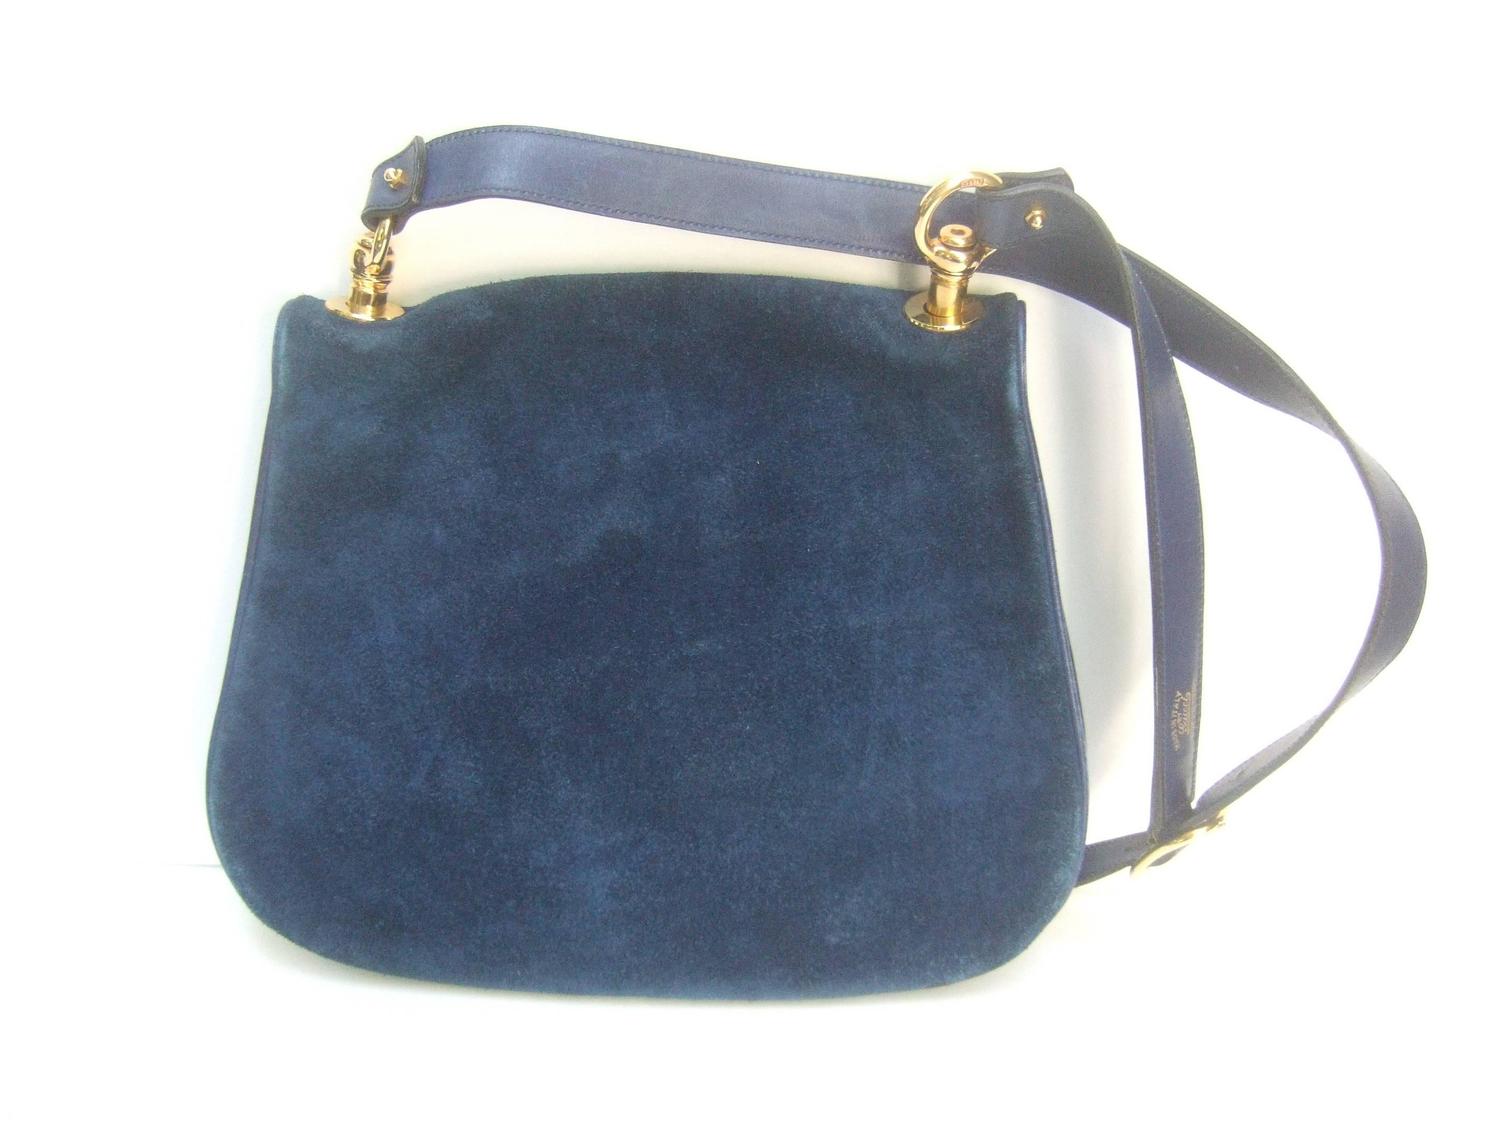 Gucci Italy Rare Midnight Blue Suede Shoulder Bag c 1970s at 1stdibs